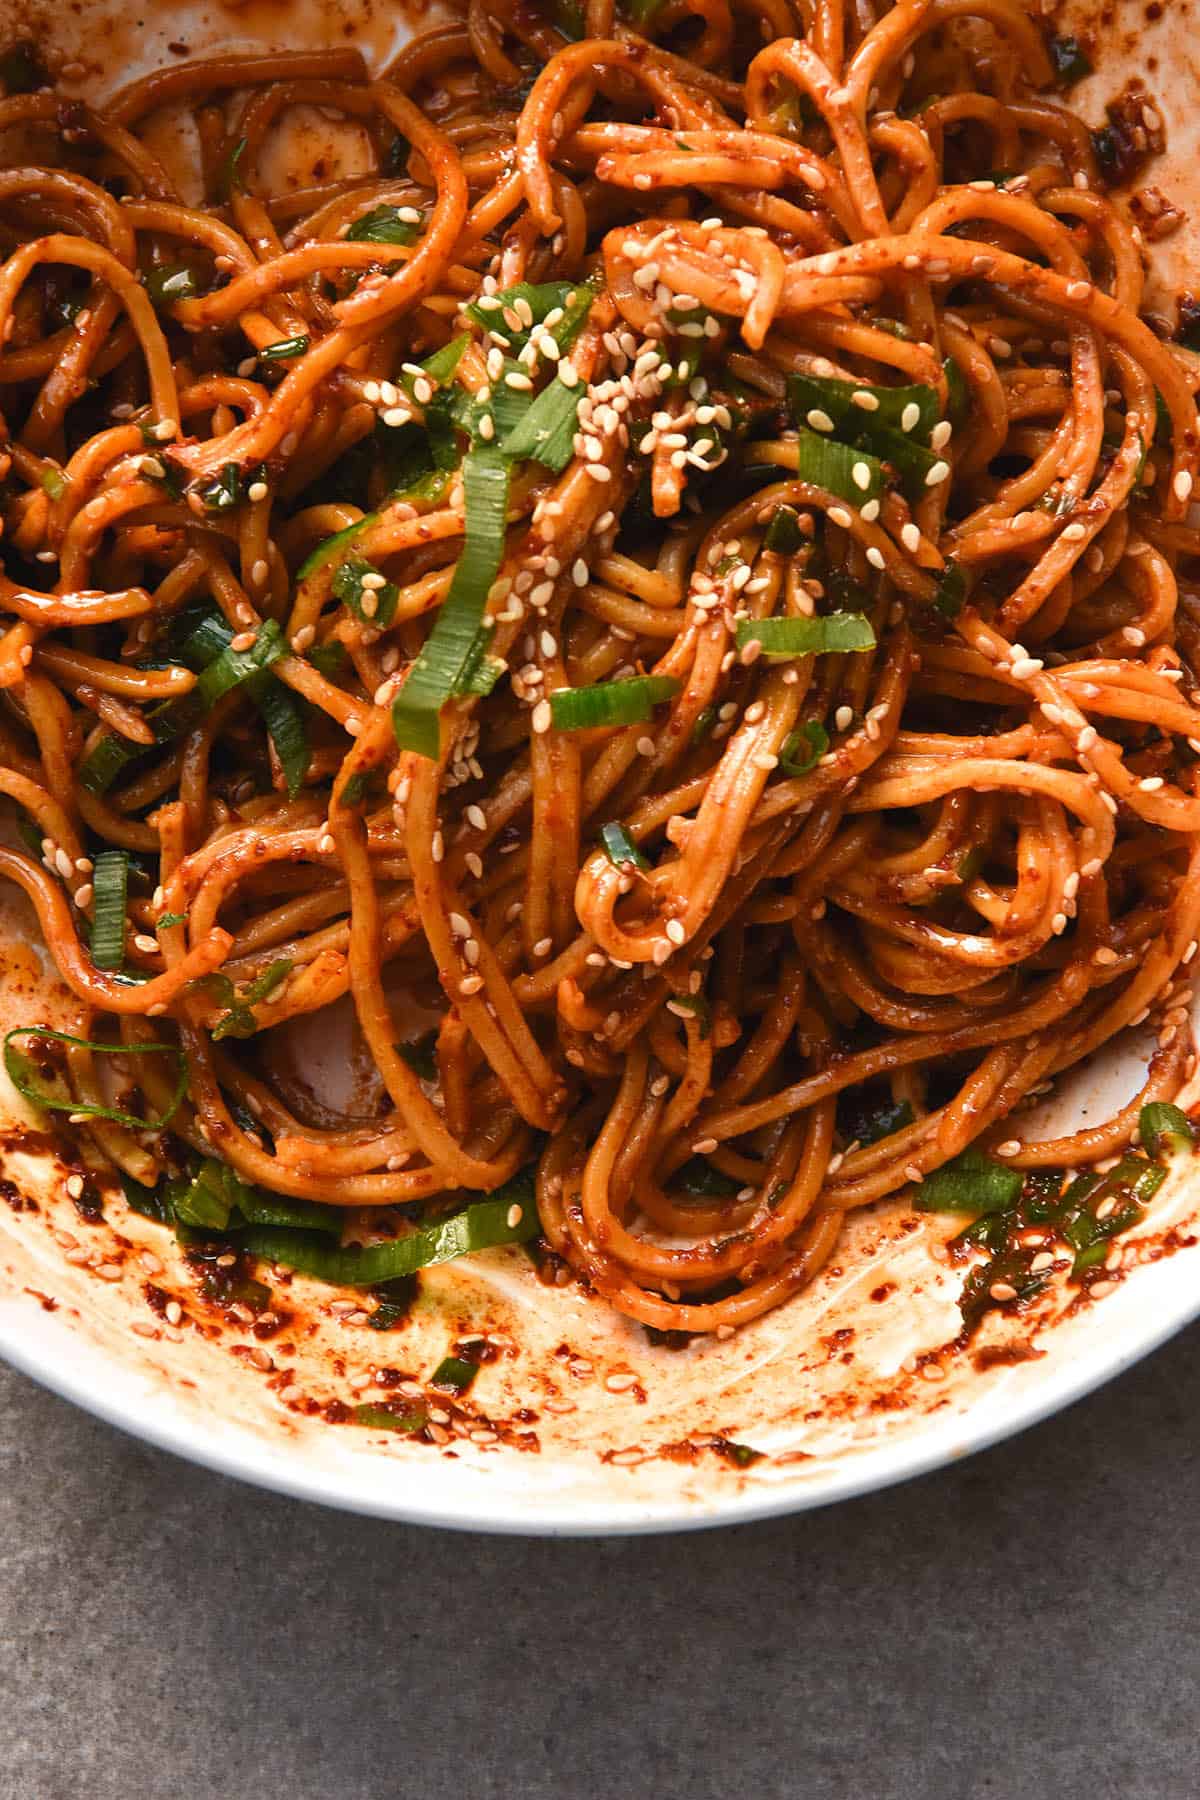 A close up aerial view of a messy white bowl of FODMAP friendly garlic oil noodles. The noodles are a deep red hue and topped with sesame seeds and spring onion greens. The grey stone backdrop is visible underneath the bowl in the bottom of the image